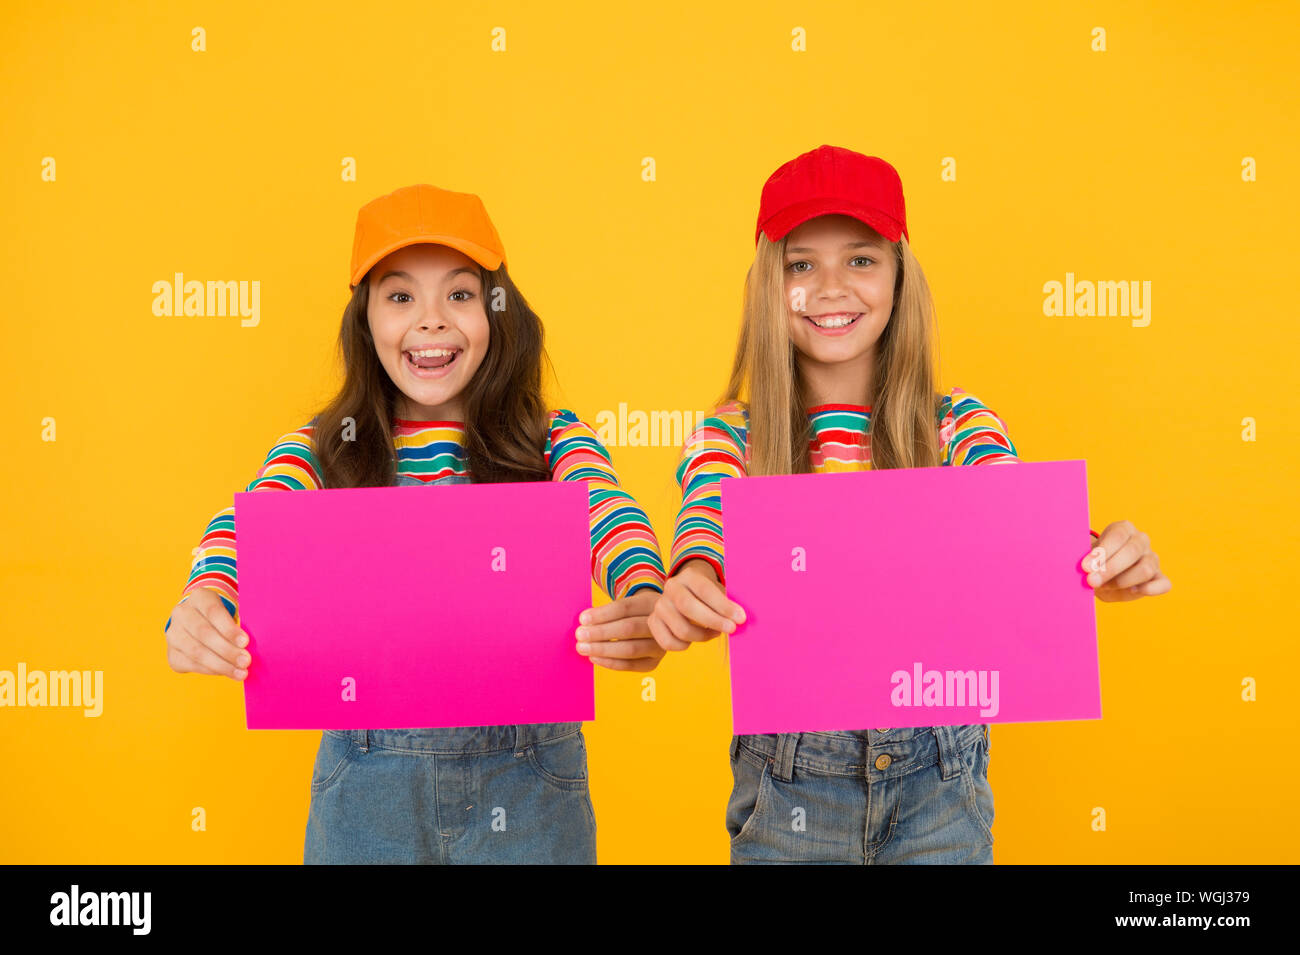 For your product. Happy children holding empty sheets of paper. Little children smiling with pink drawing paper. Small children with blank advertisement poster. Cute children advertising, copy space. Stock Photo